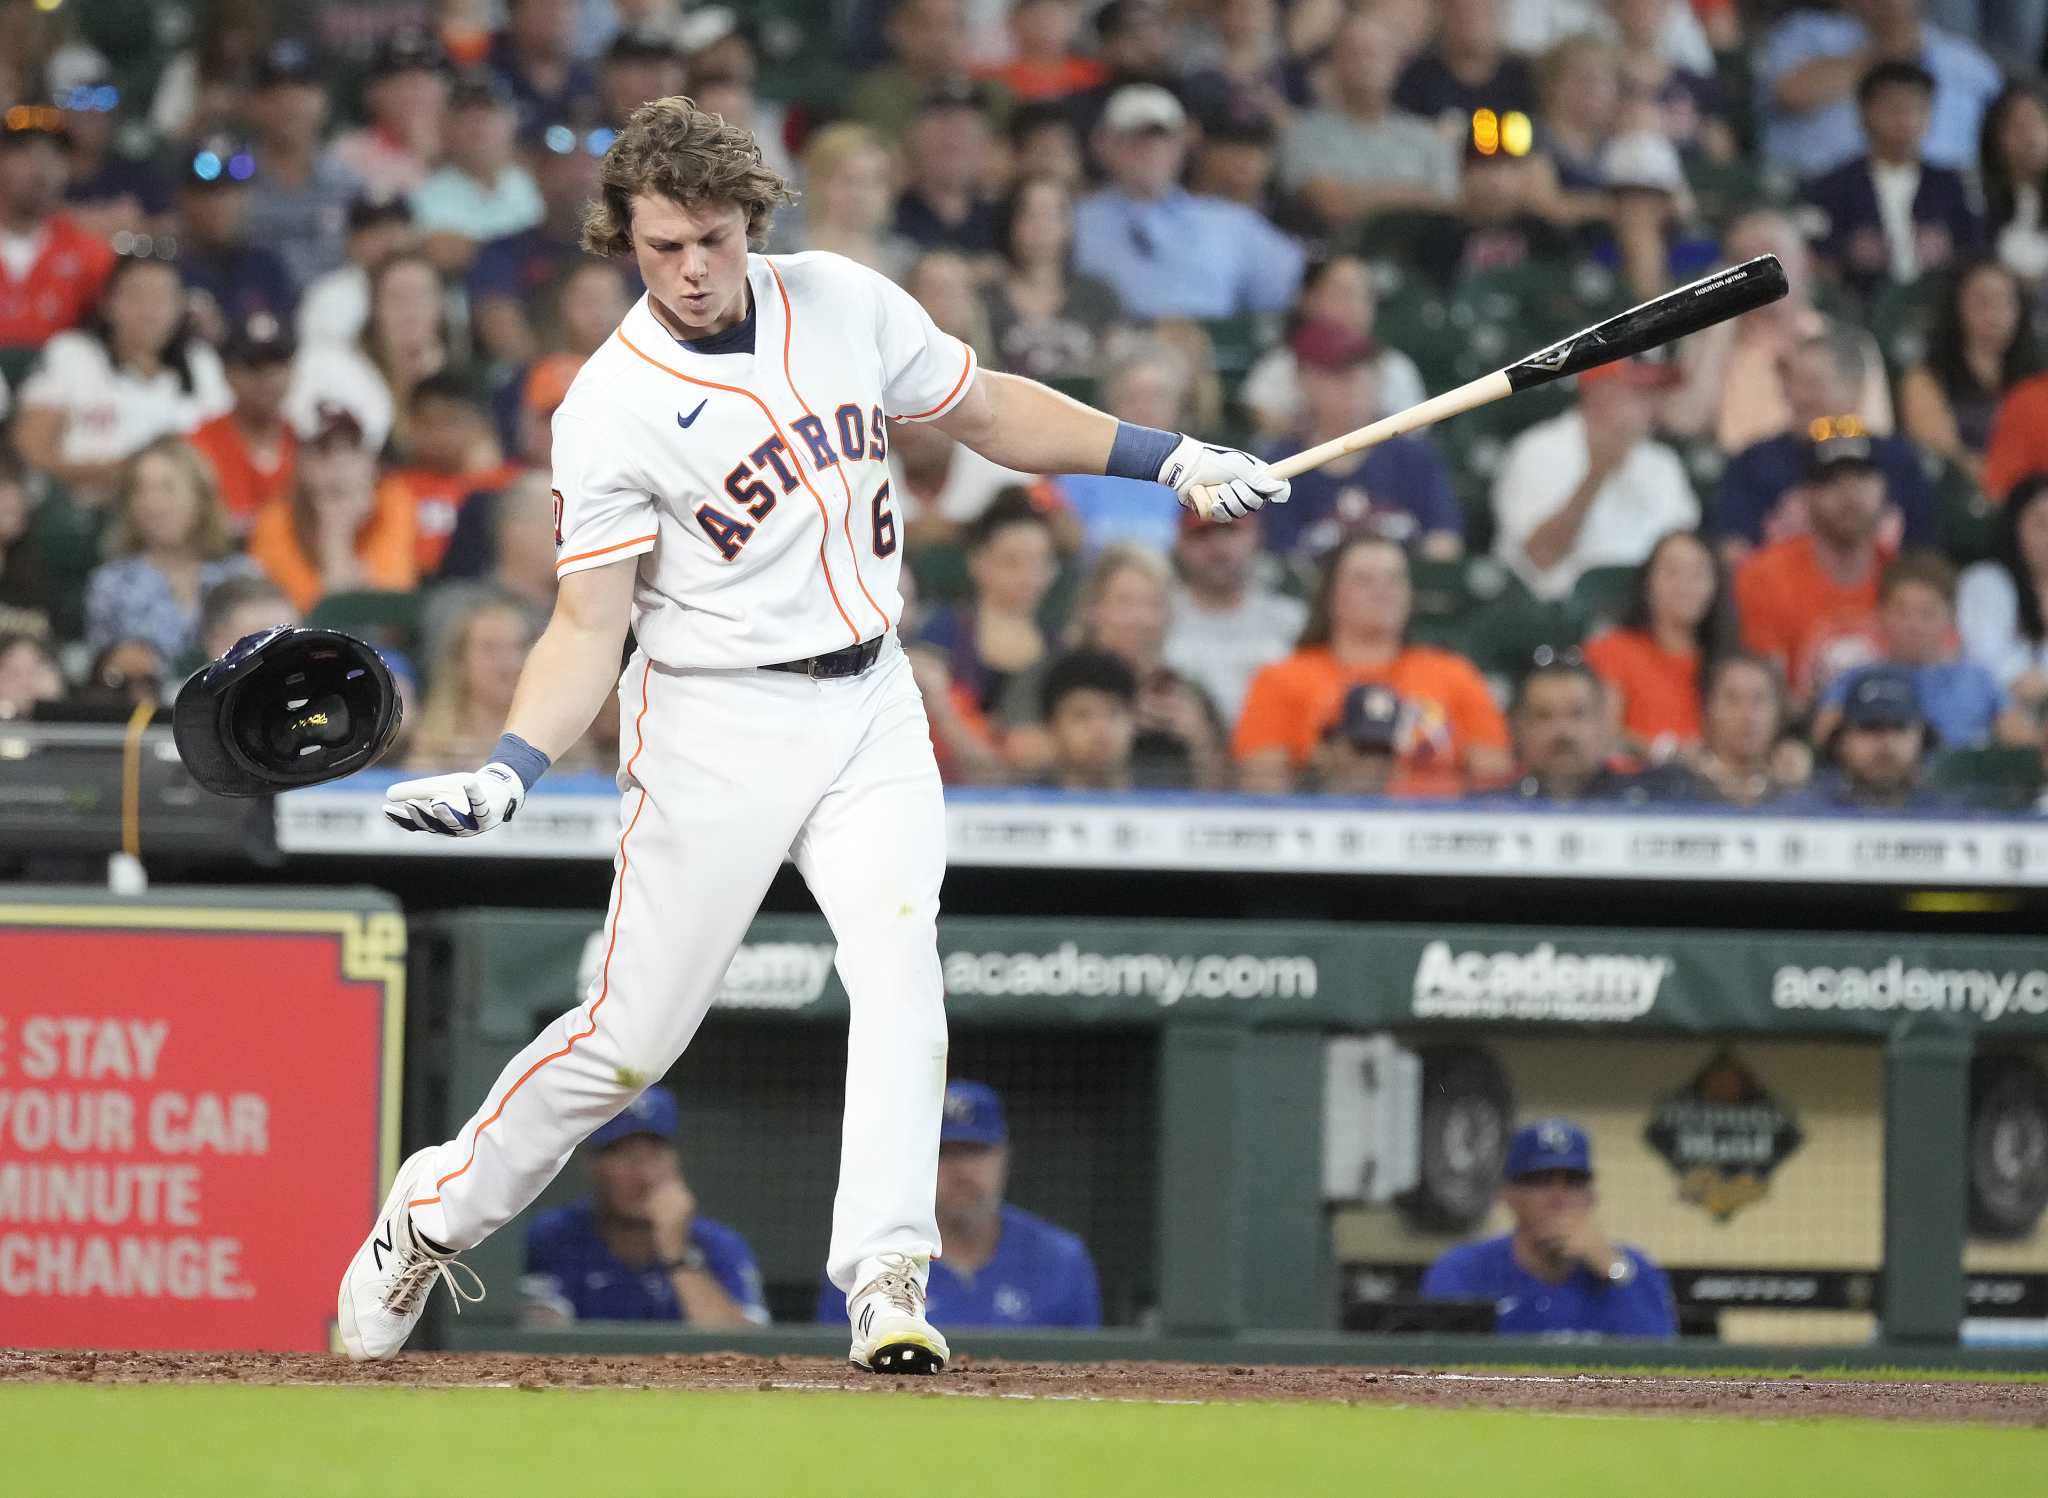 Astros: 4 top prospects Houston could trade at 2023 MLB trade deadline